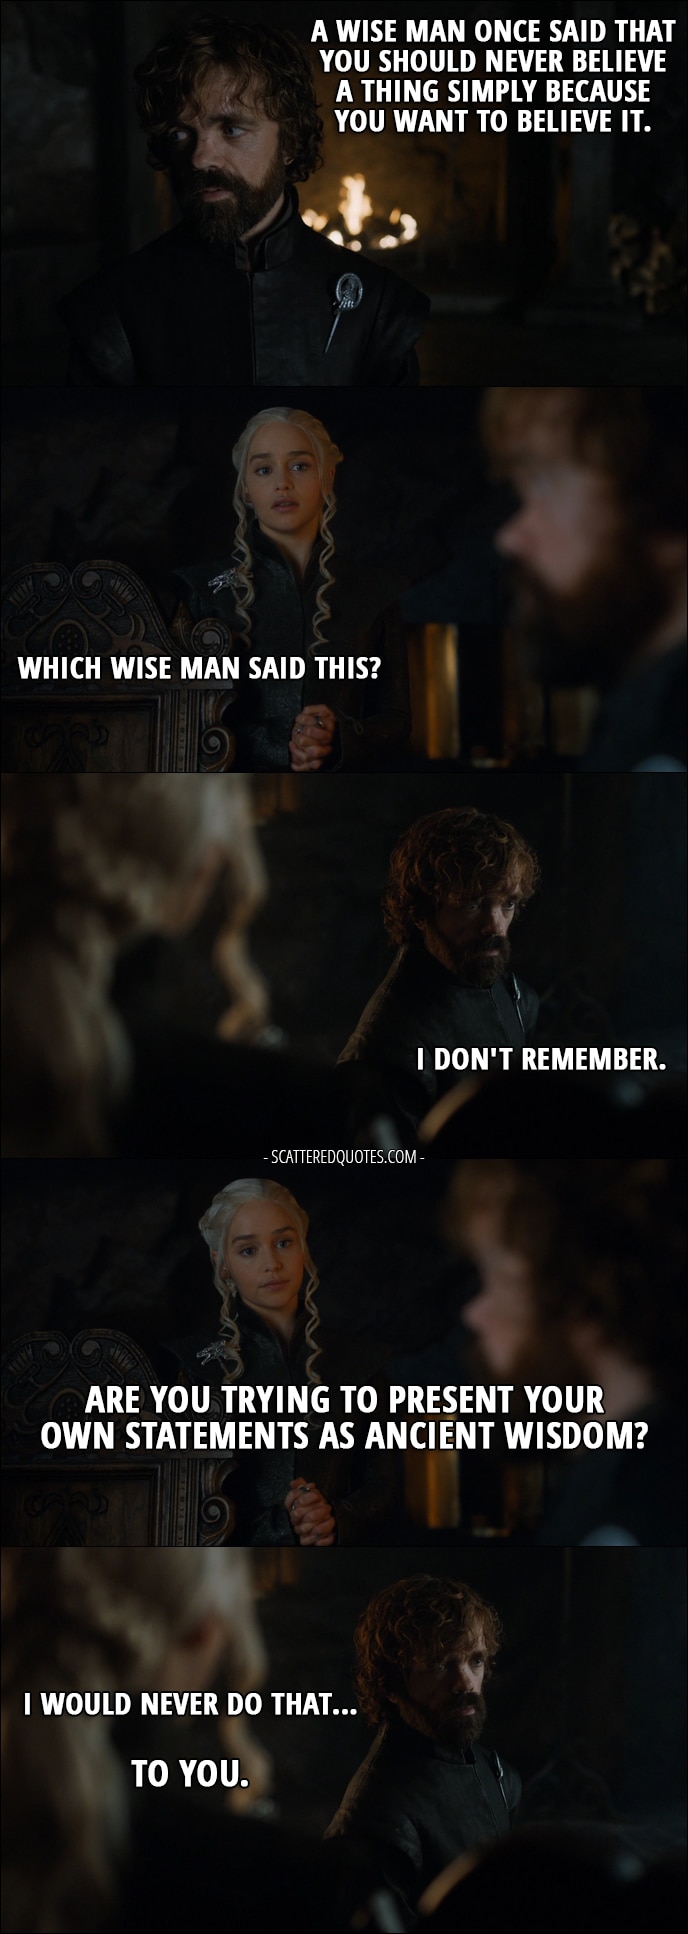 tyrion lannister quotes to jon snow